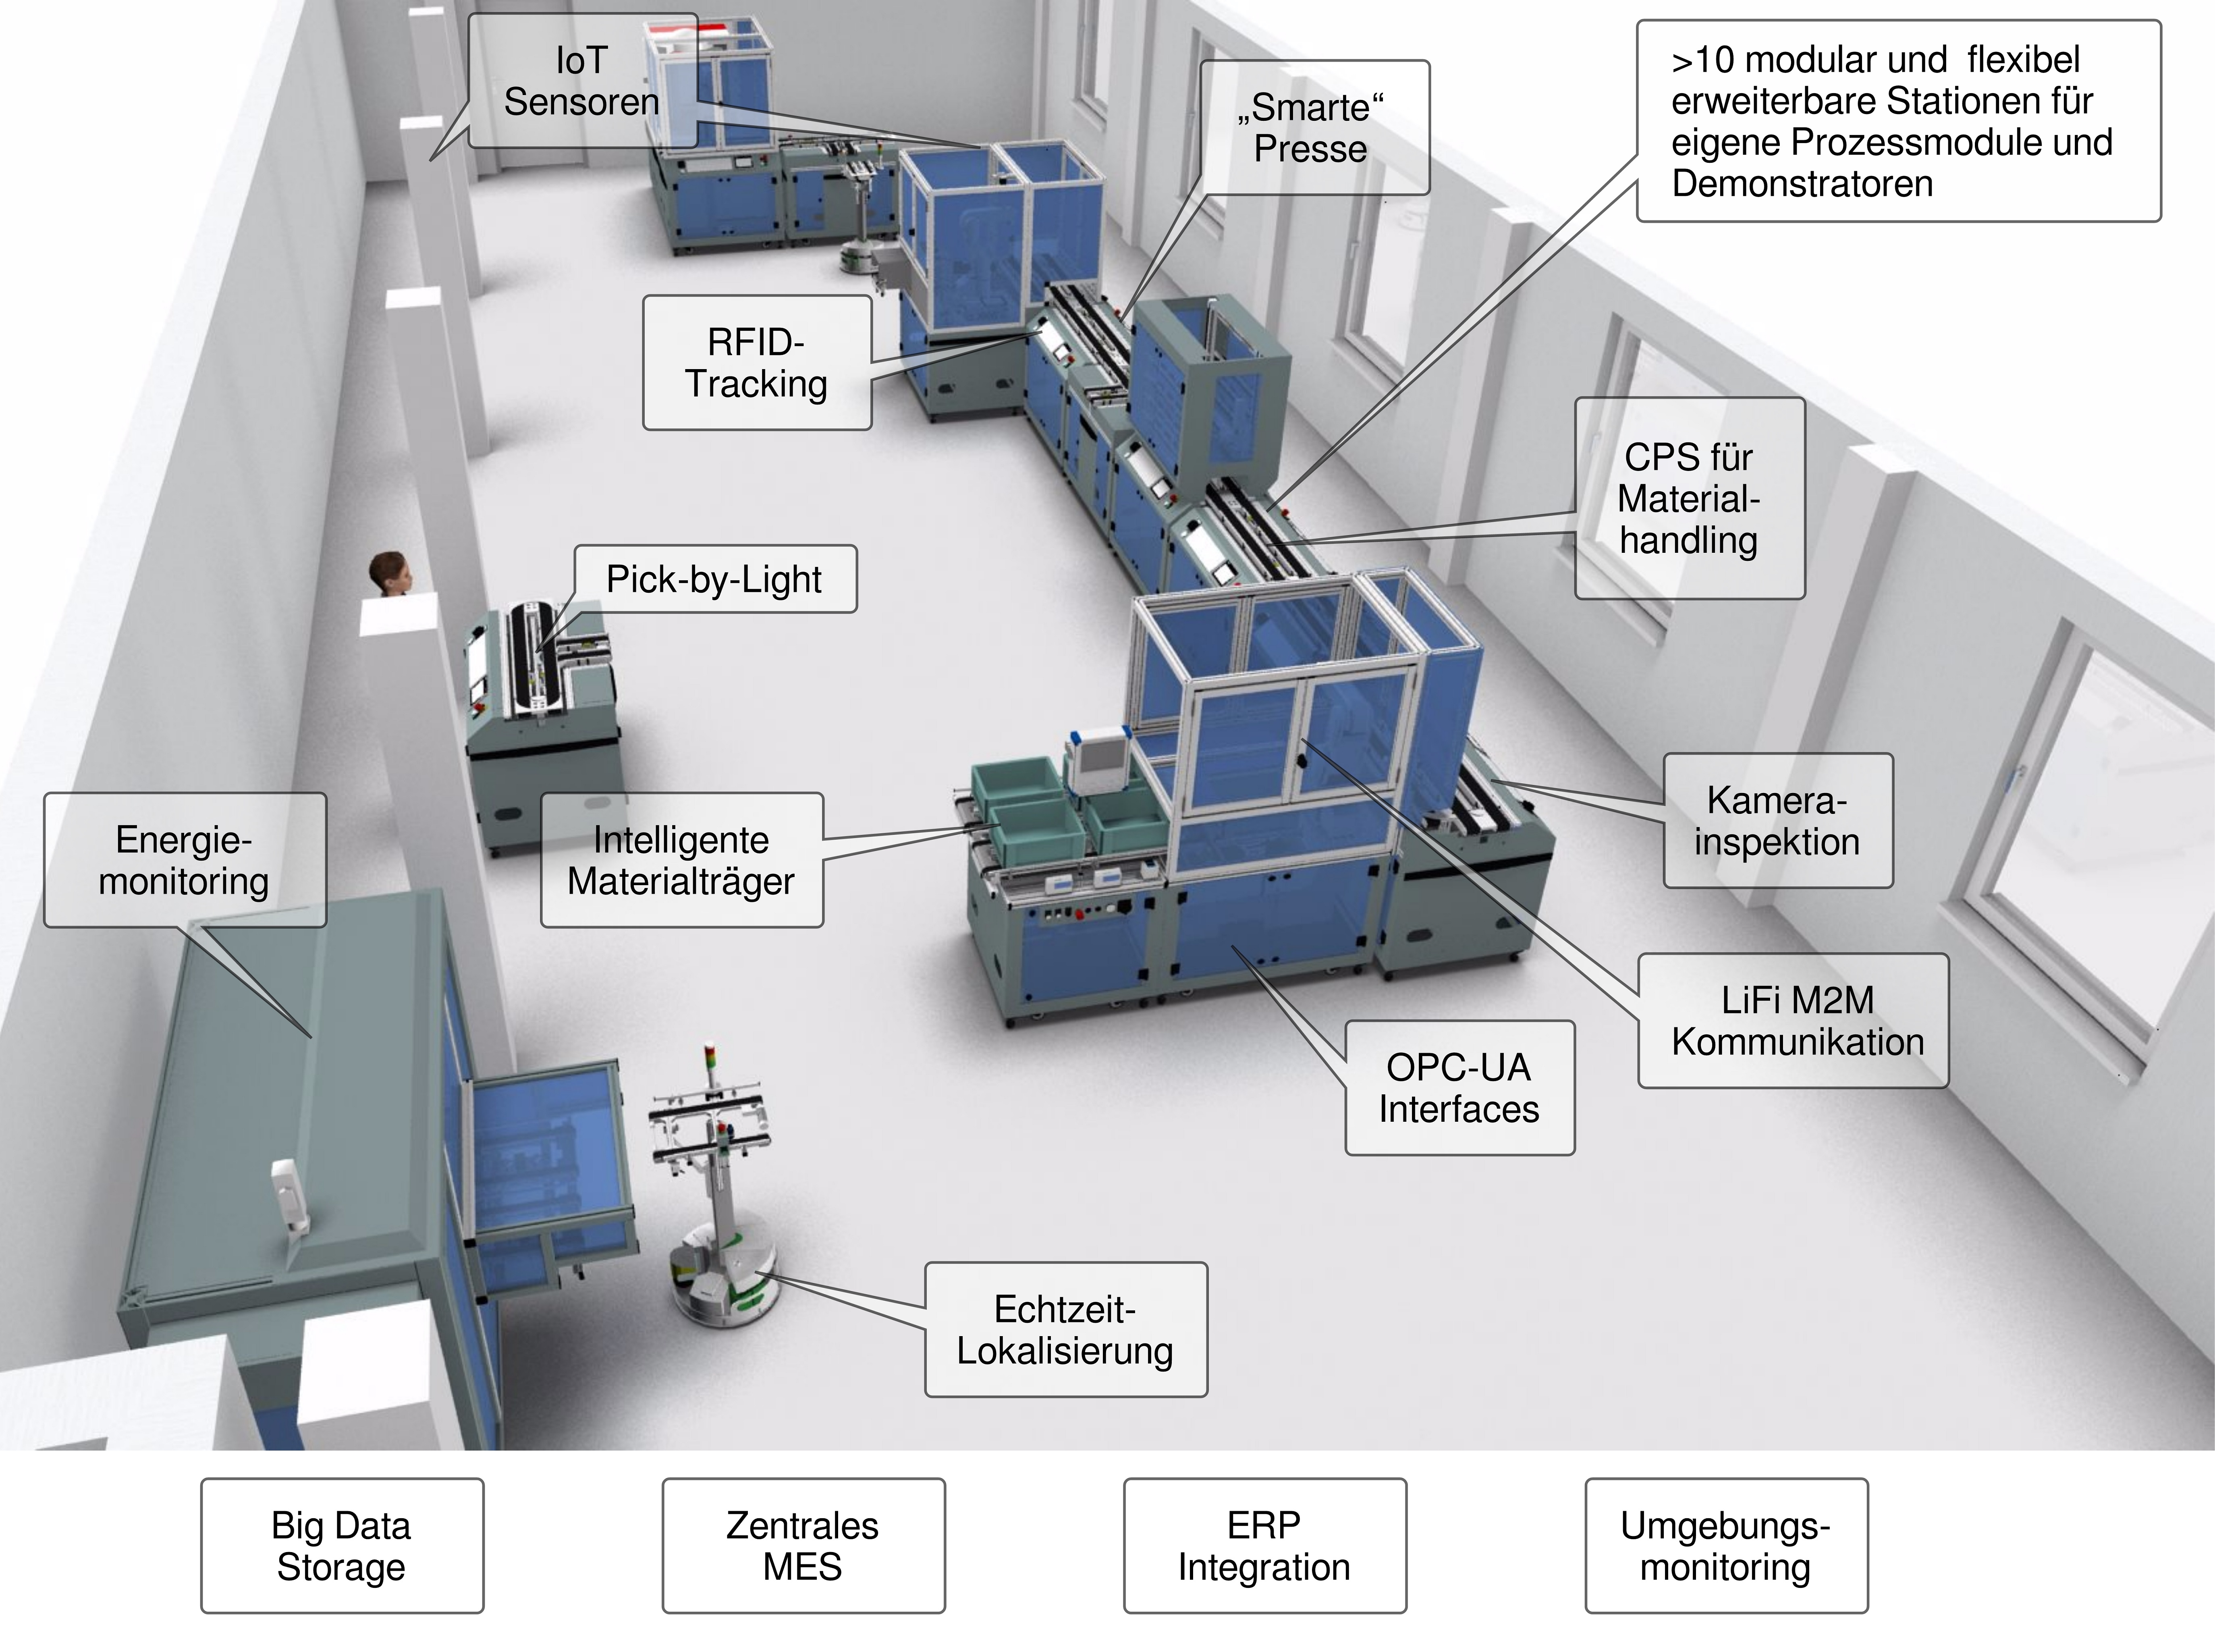 Scheme of the model factory with the designation of the Industry 4. 0 key components